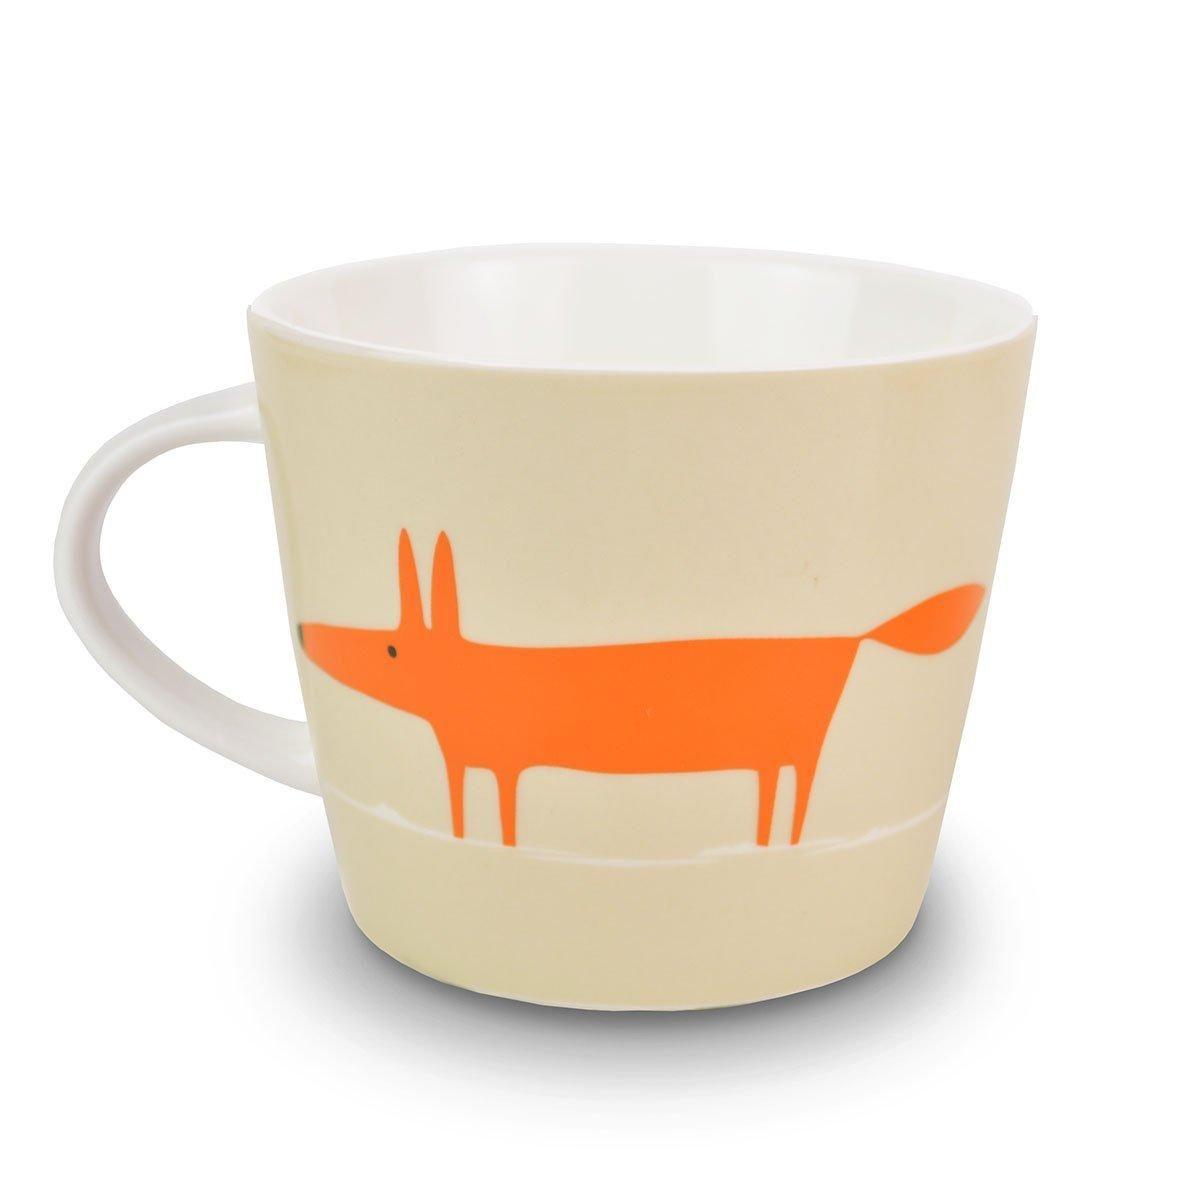  Mugs And Cups SC-0018 